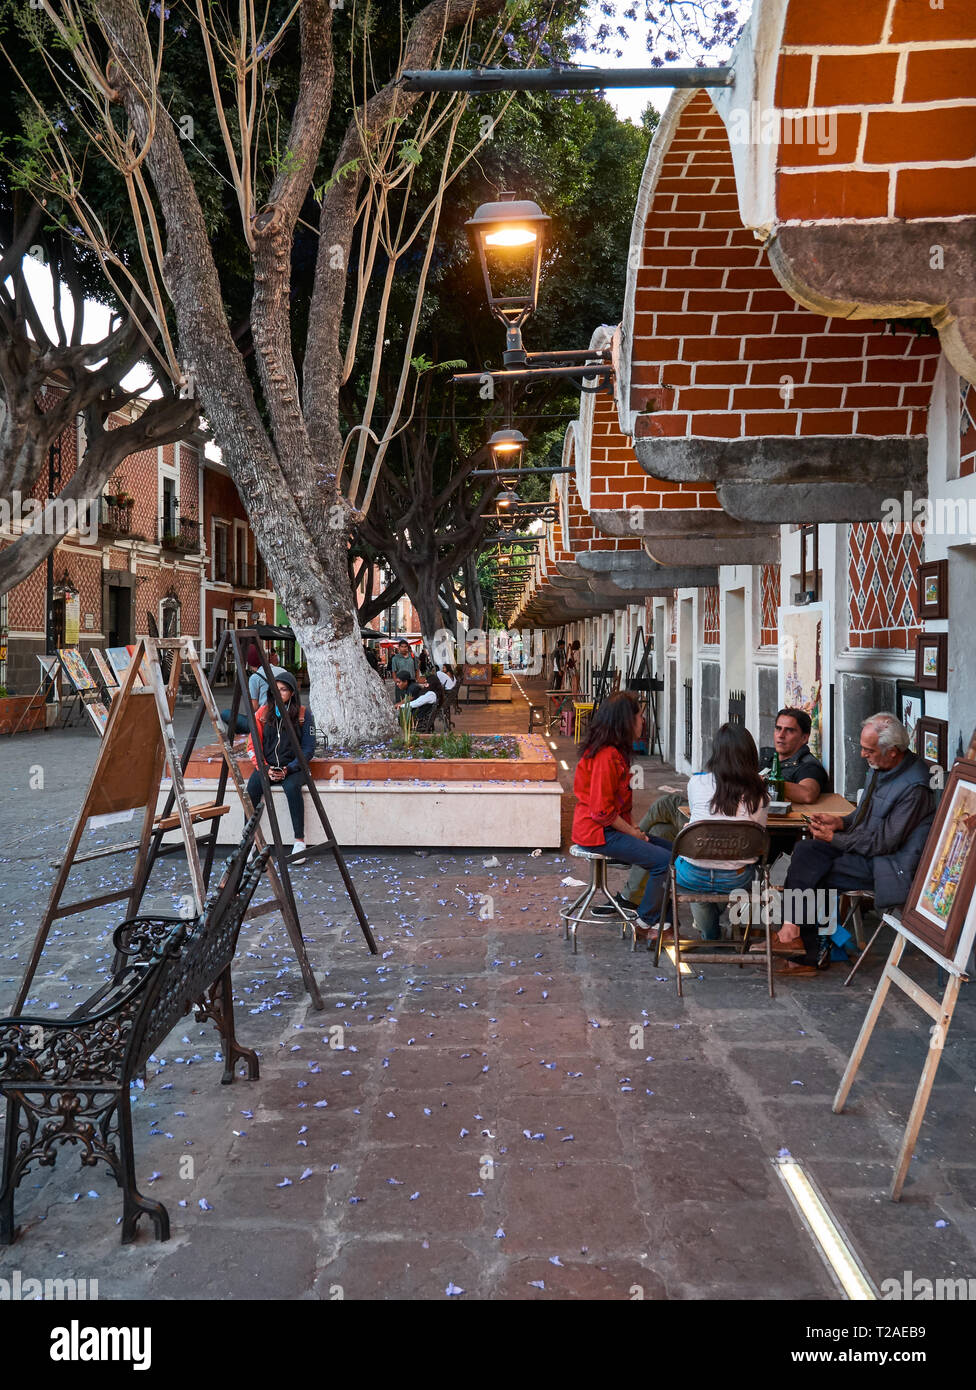 Old street with artists, workshops and paintings in Mexican Artist Quarter,  Barrio Del Artista, Calle 8 Norte, Puebla, Mexico Stock Photo